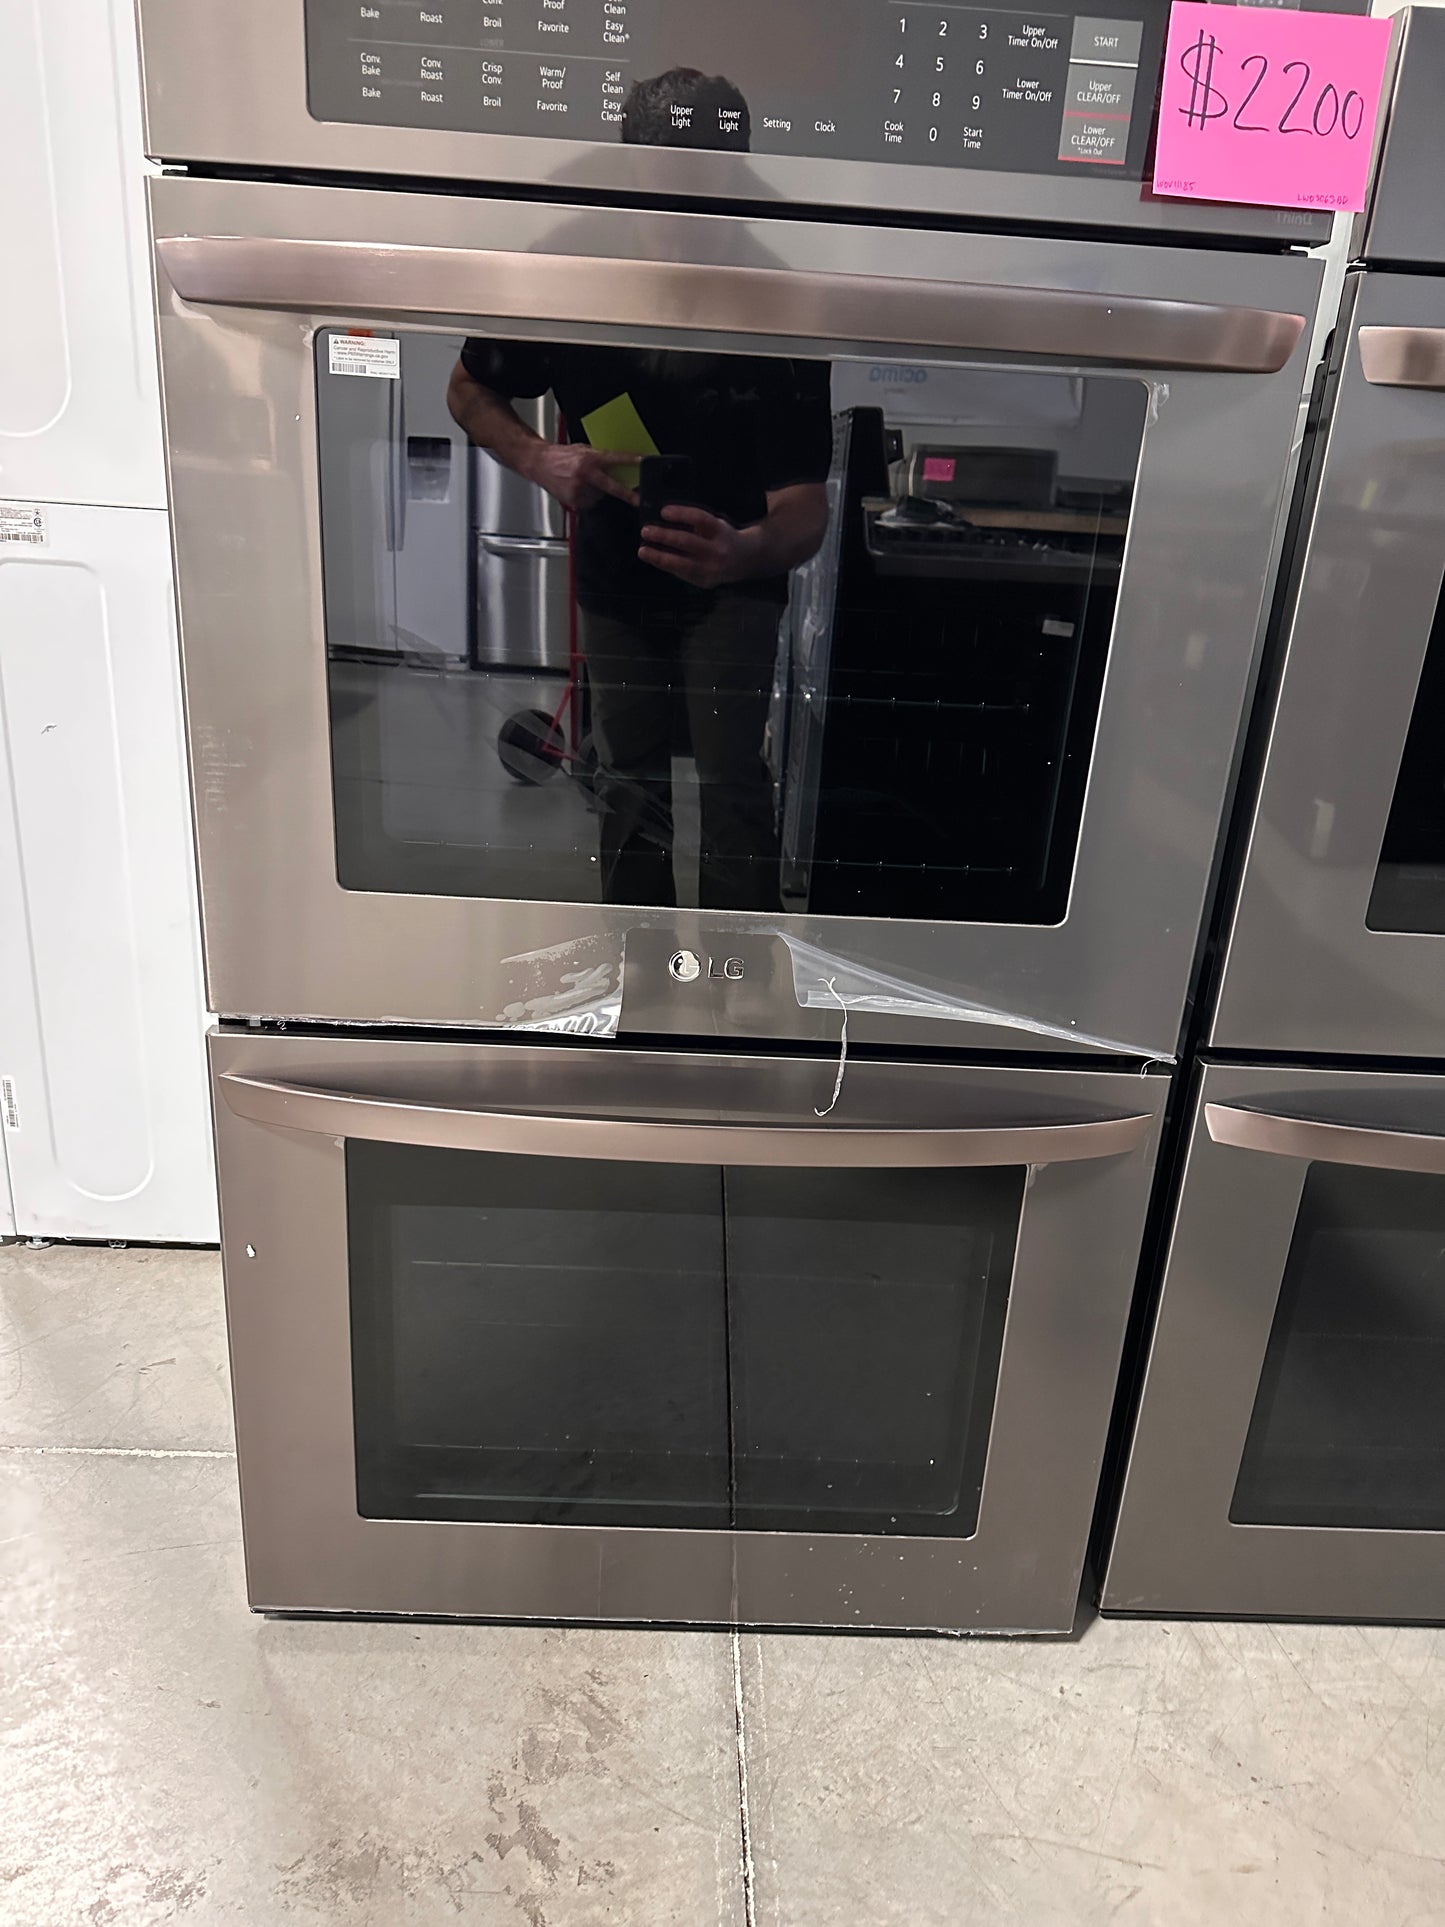 DOUBLE WALL OVEN with EASYCLEAN - NEW LG WALL OVEN - WOV11185